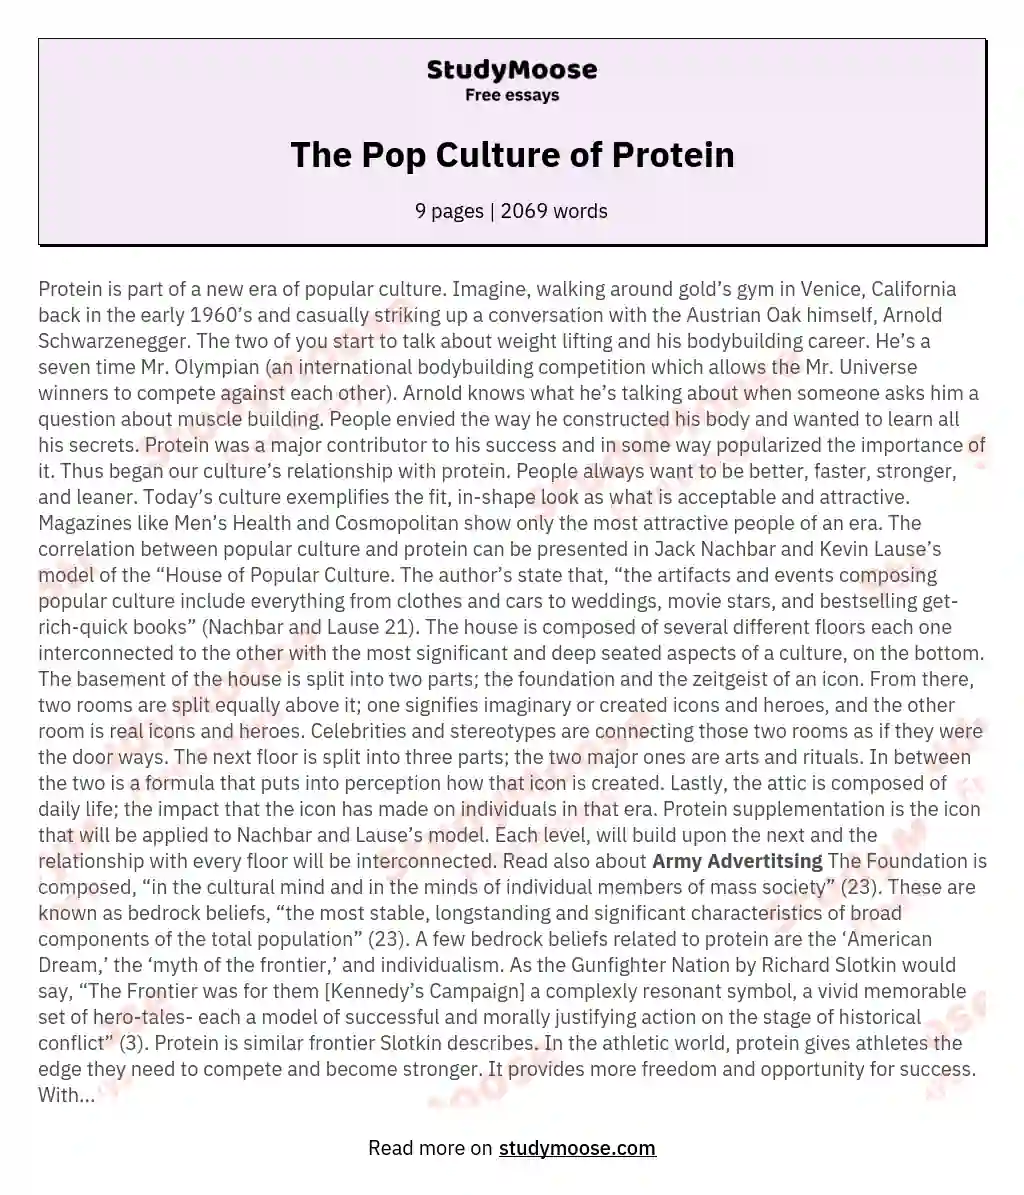 The Pop Culture of Protein essay